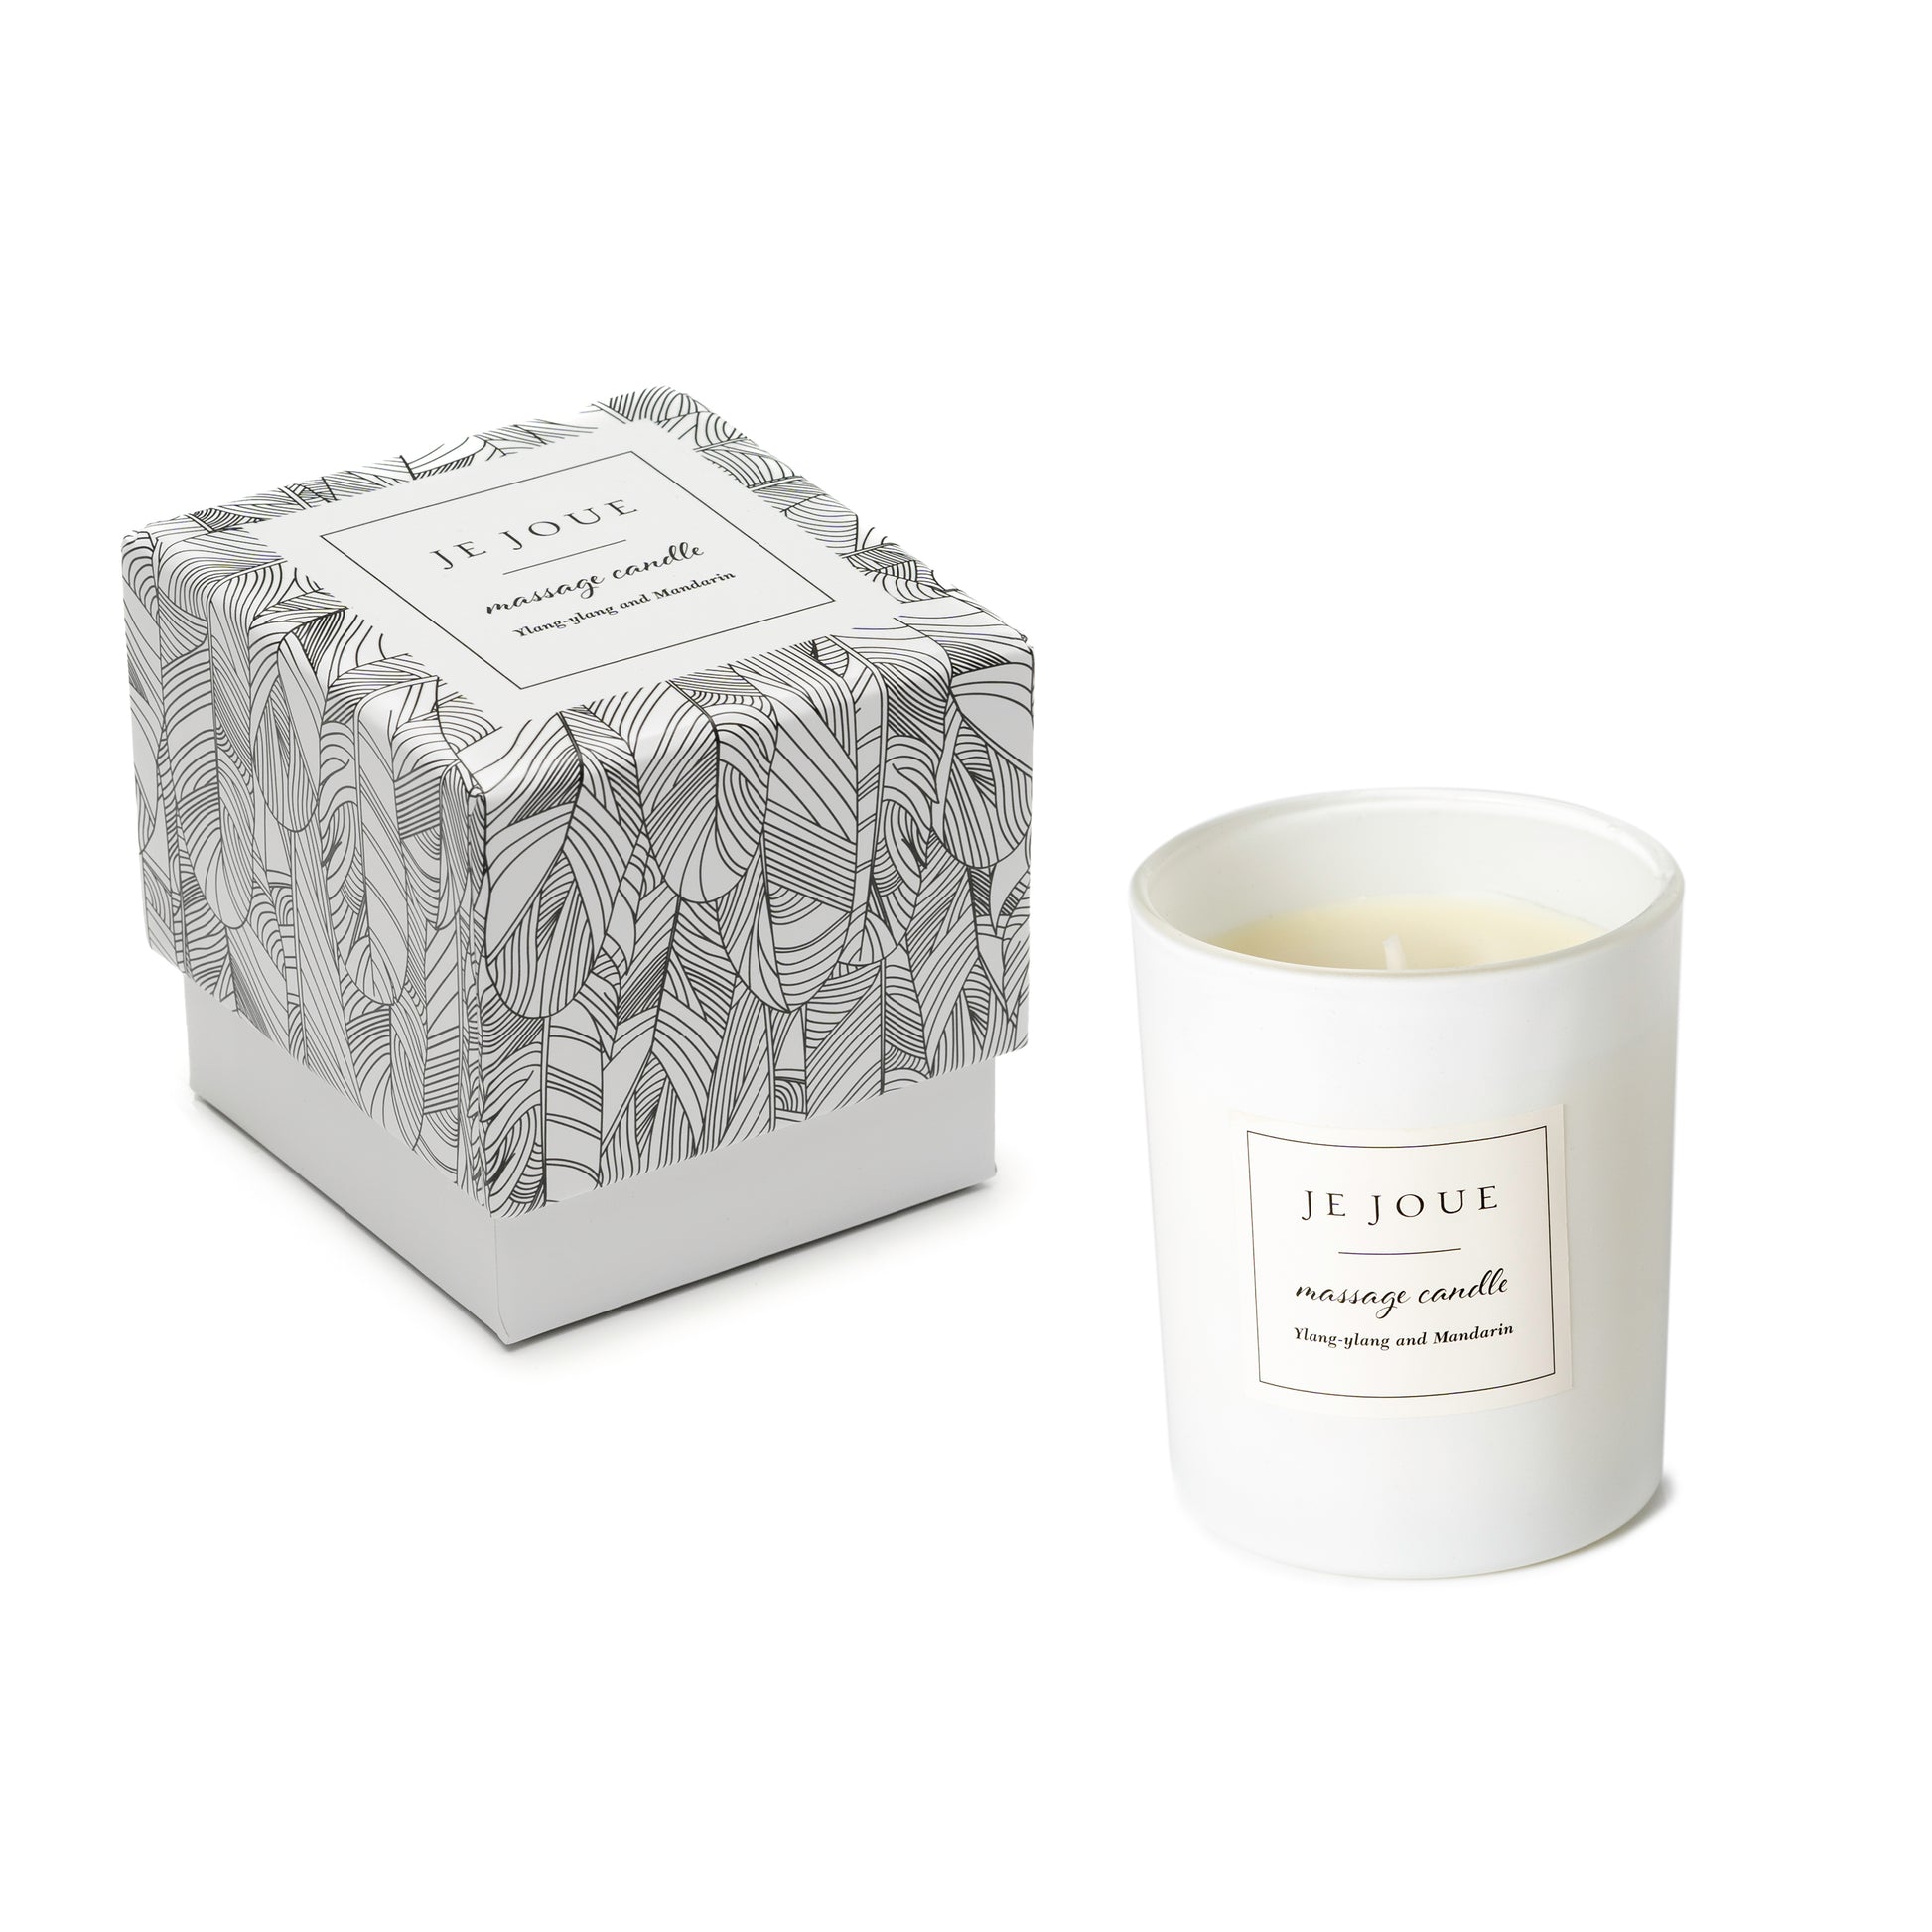 Je Joue massage candle in white with box